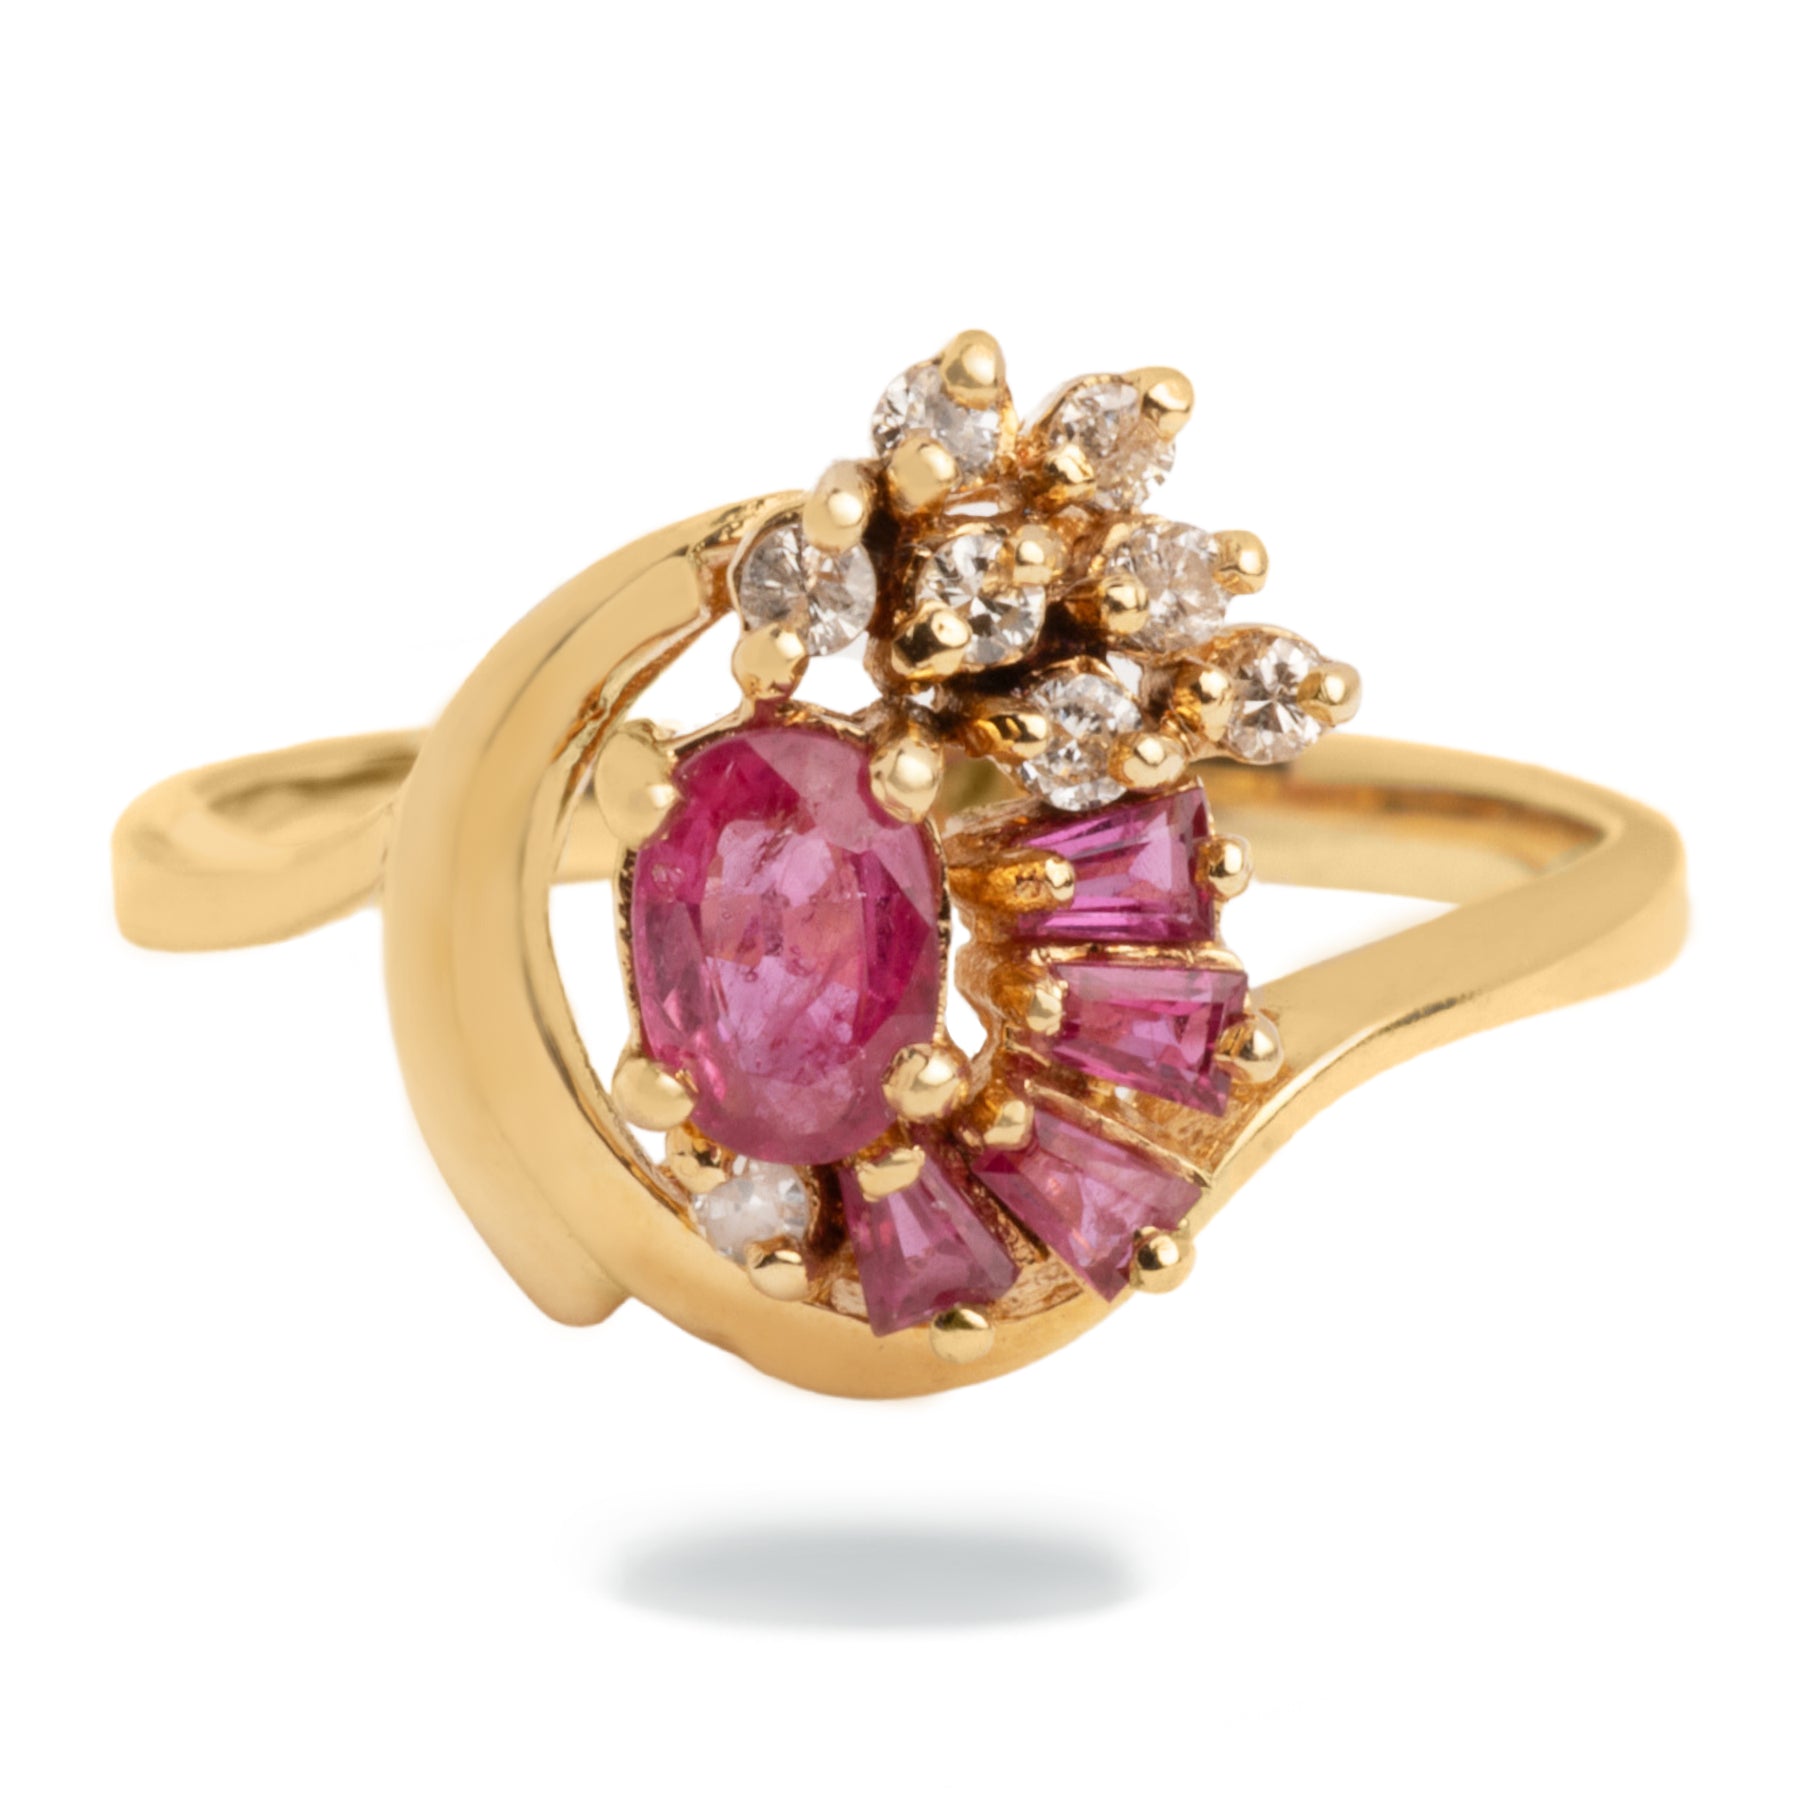 Contemporary Estate 14k Yellow Gold Ruby and Diamond Ring